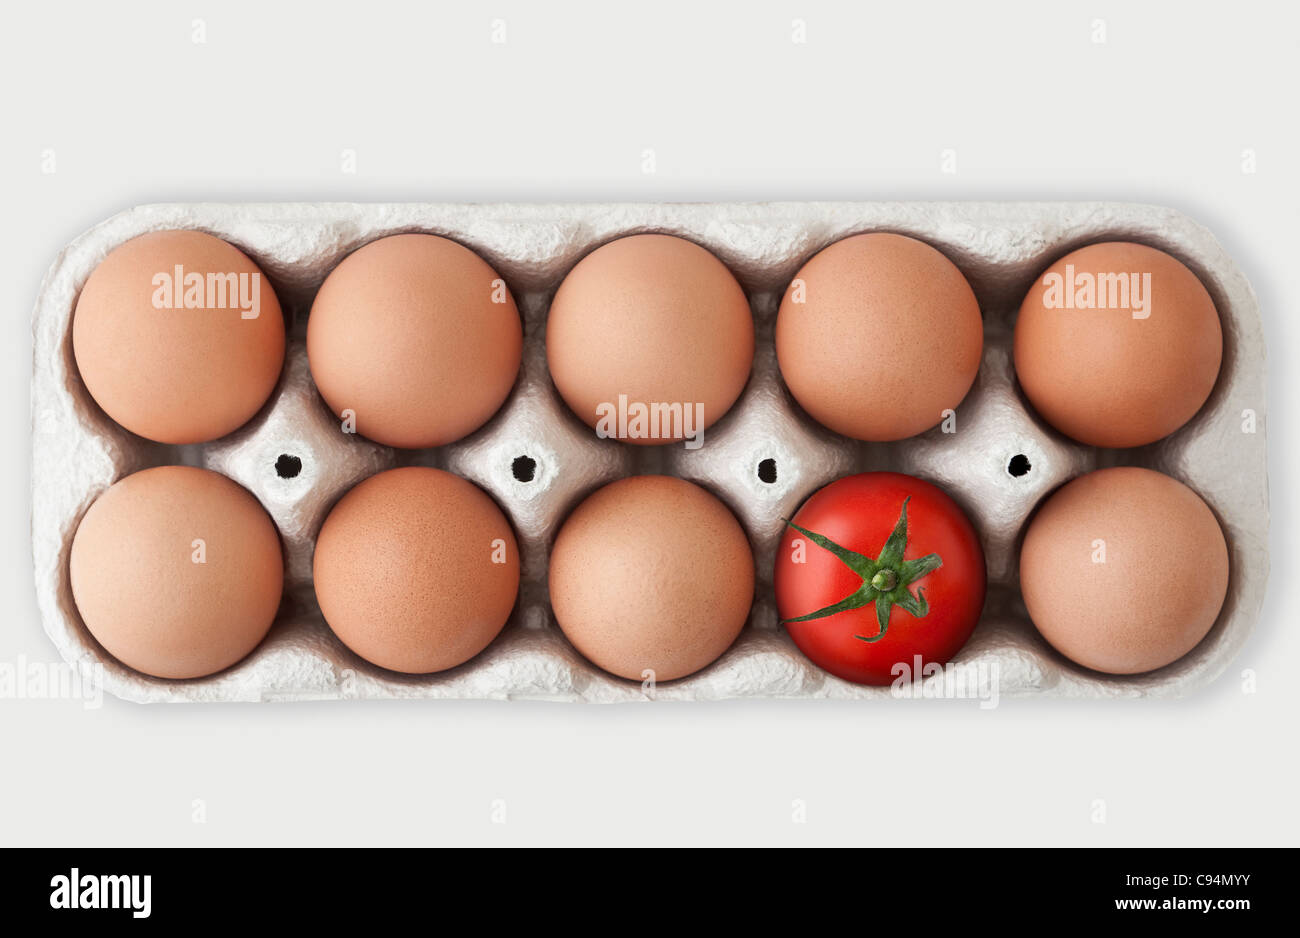 Cardboard box containing nine brown hen eggs and one single red tomato, signifying an Odd One Out concept Stock Photo